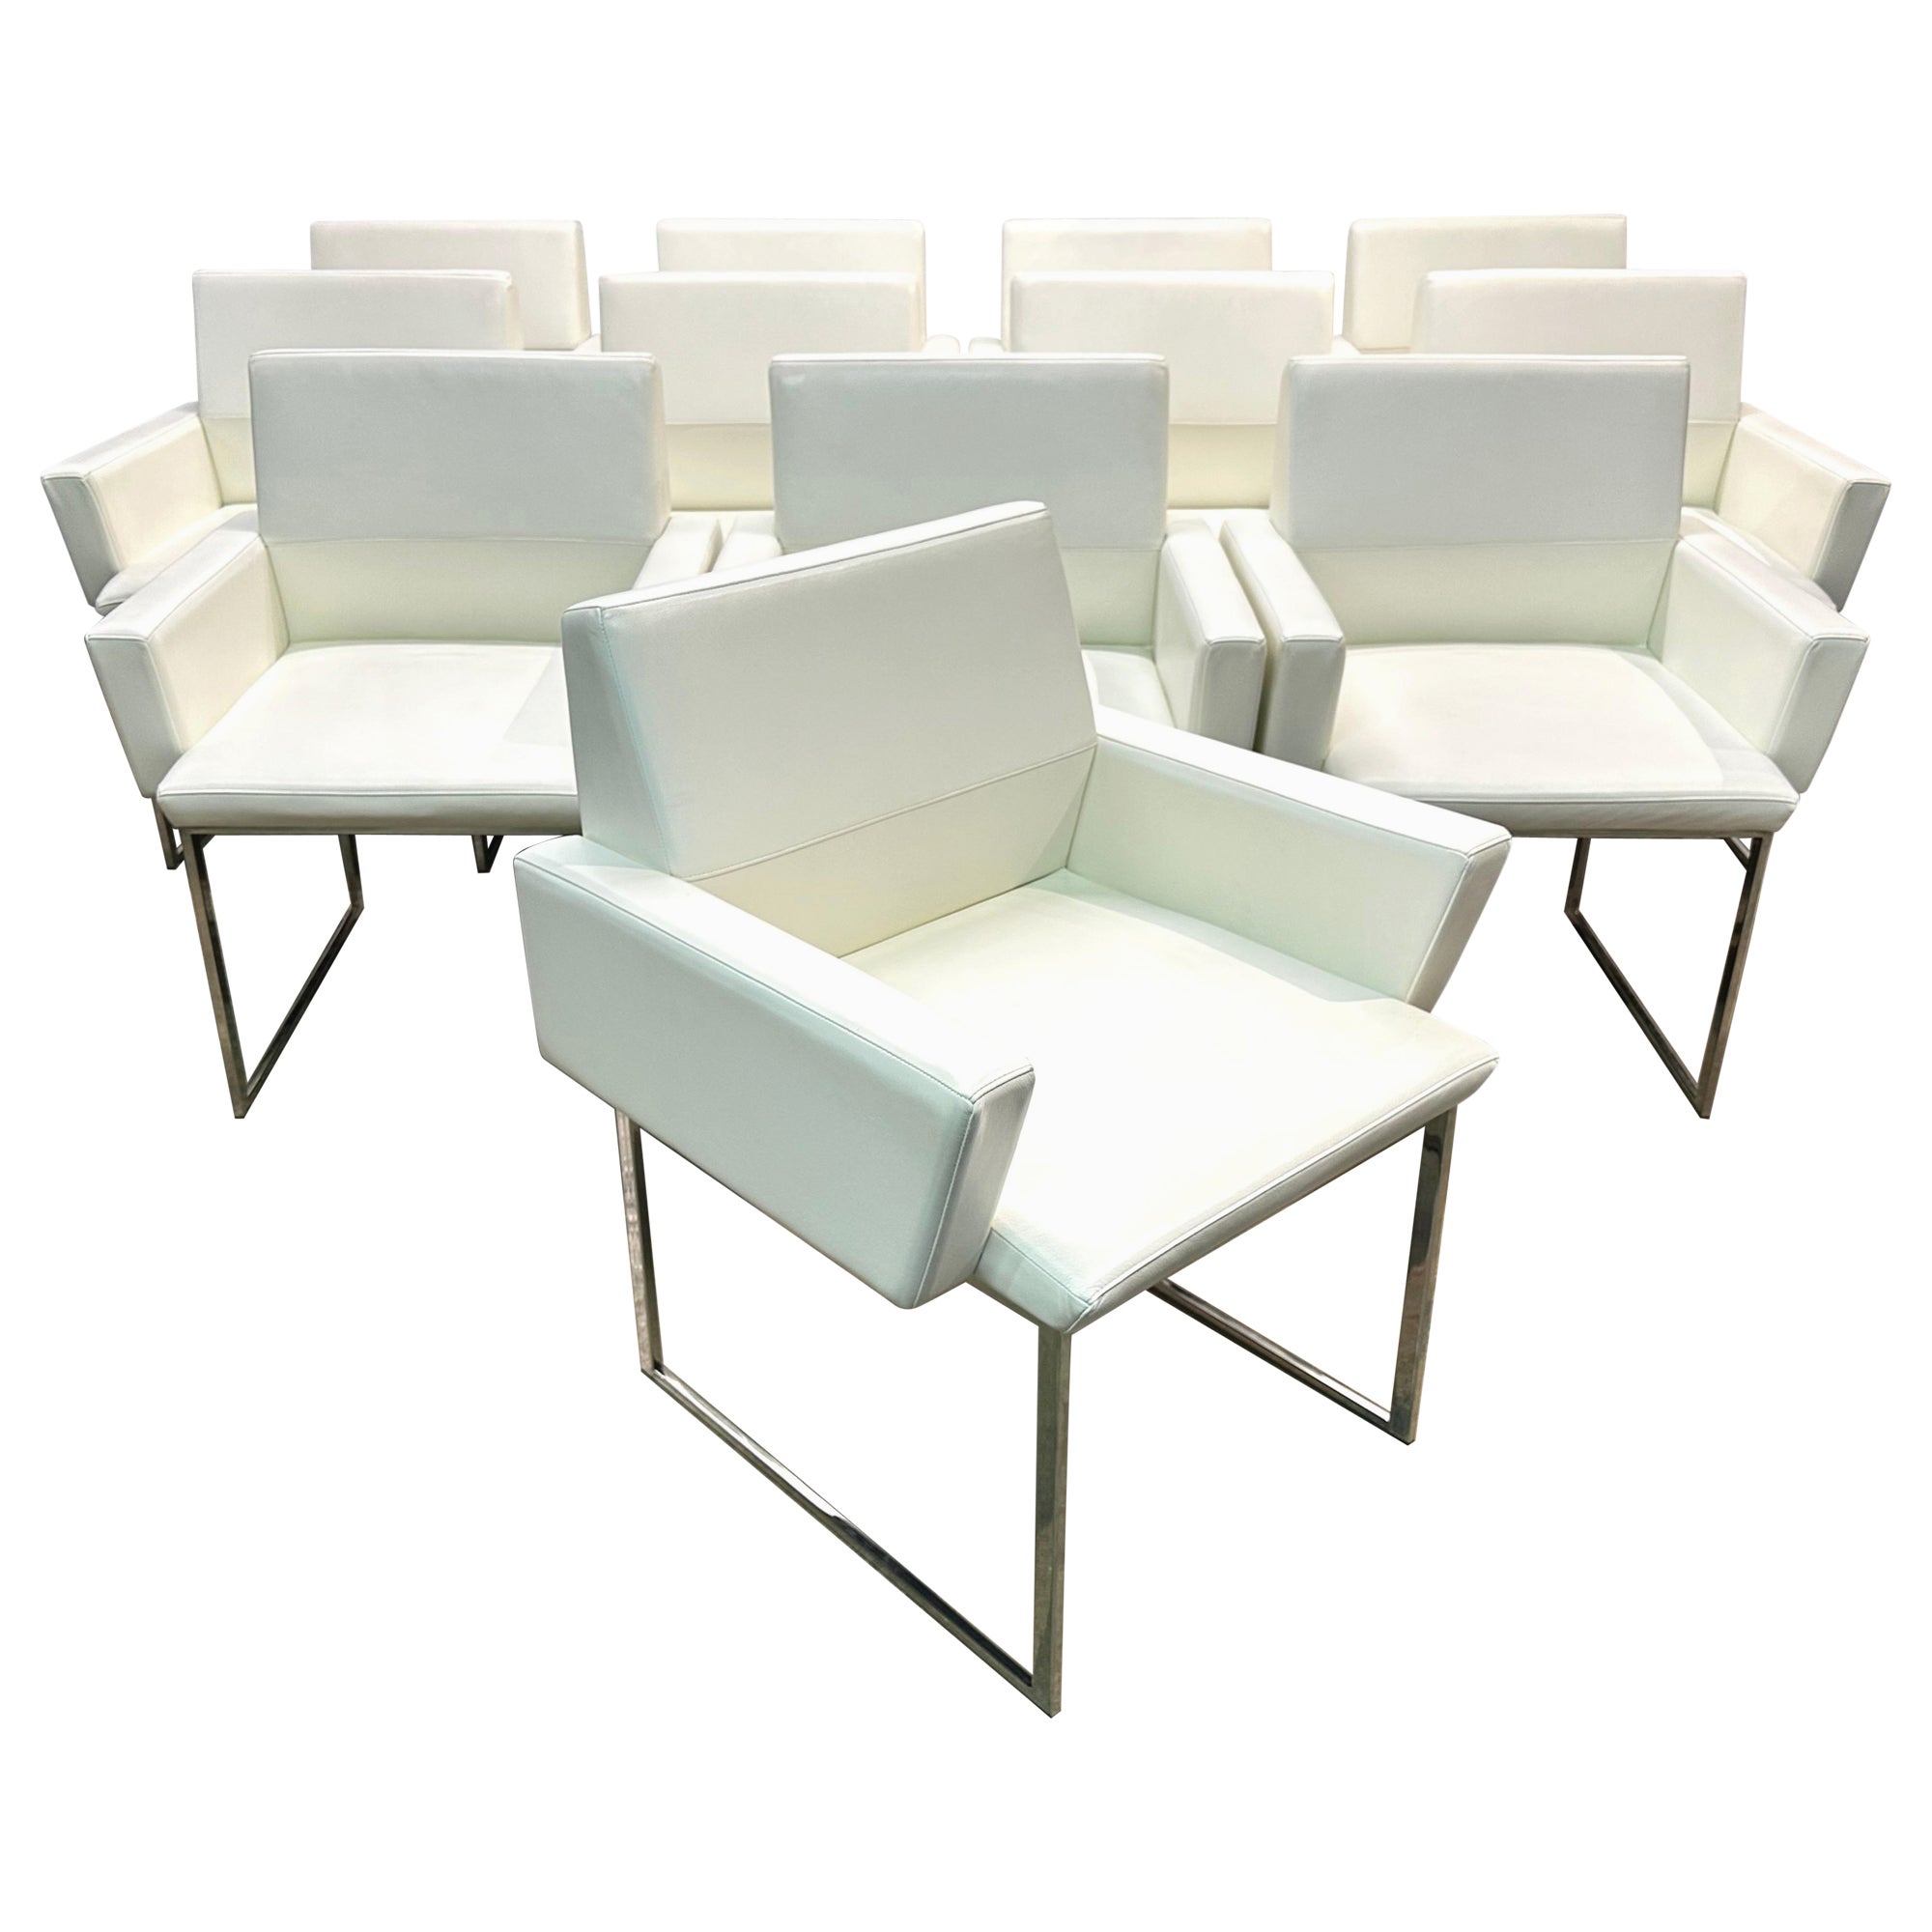 Brueton White Naugahyde and Chrome Frame Dining Arm Chairs - Ten Available For Sale